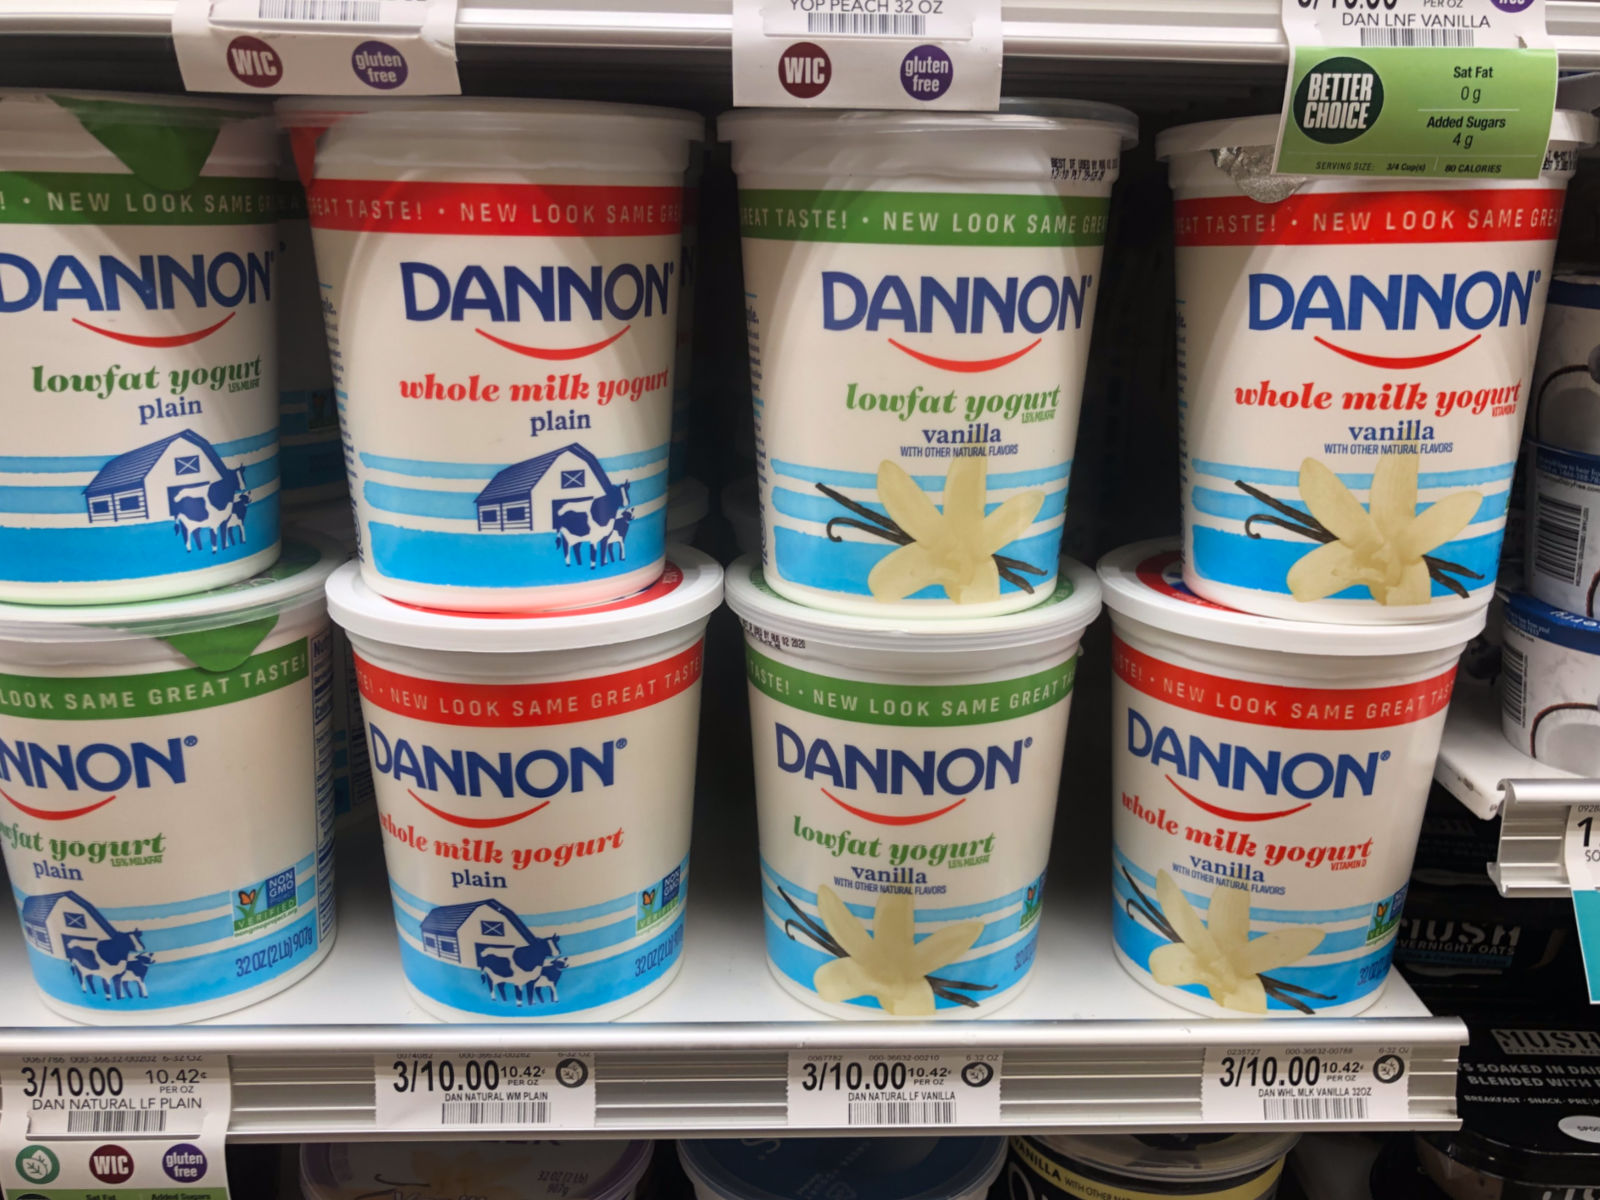 Save Big On Dannon Yogurt At Publix - New Look With The Same Great Taste! on I Heart Publix 2